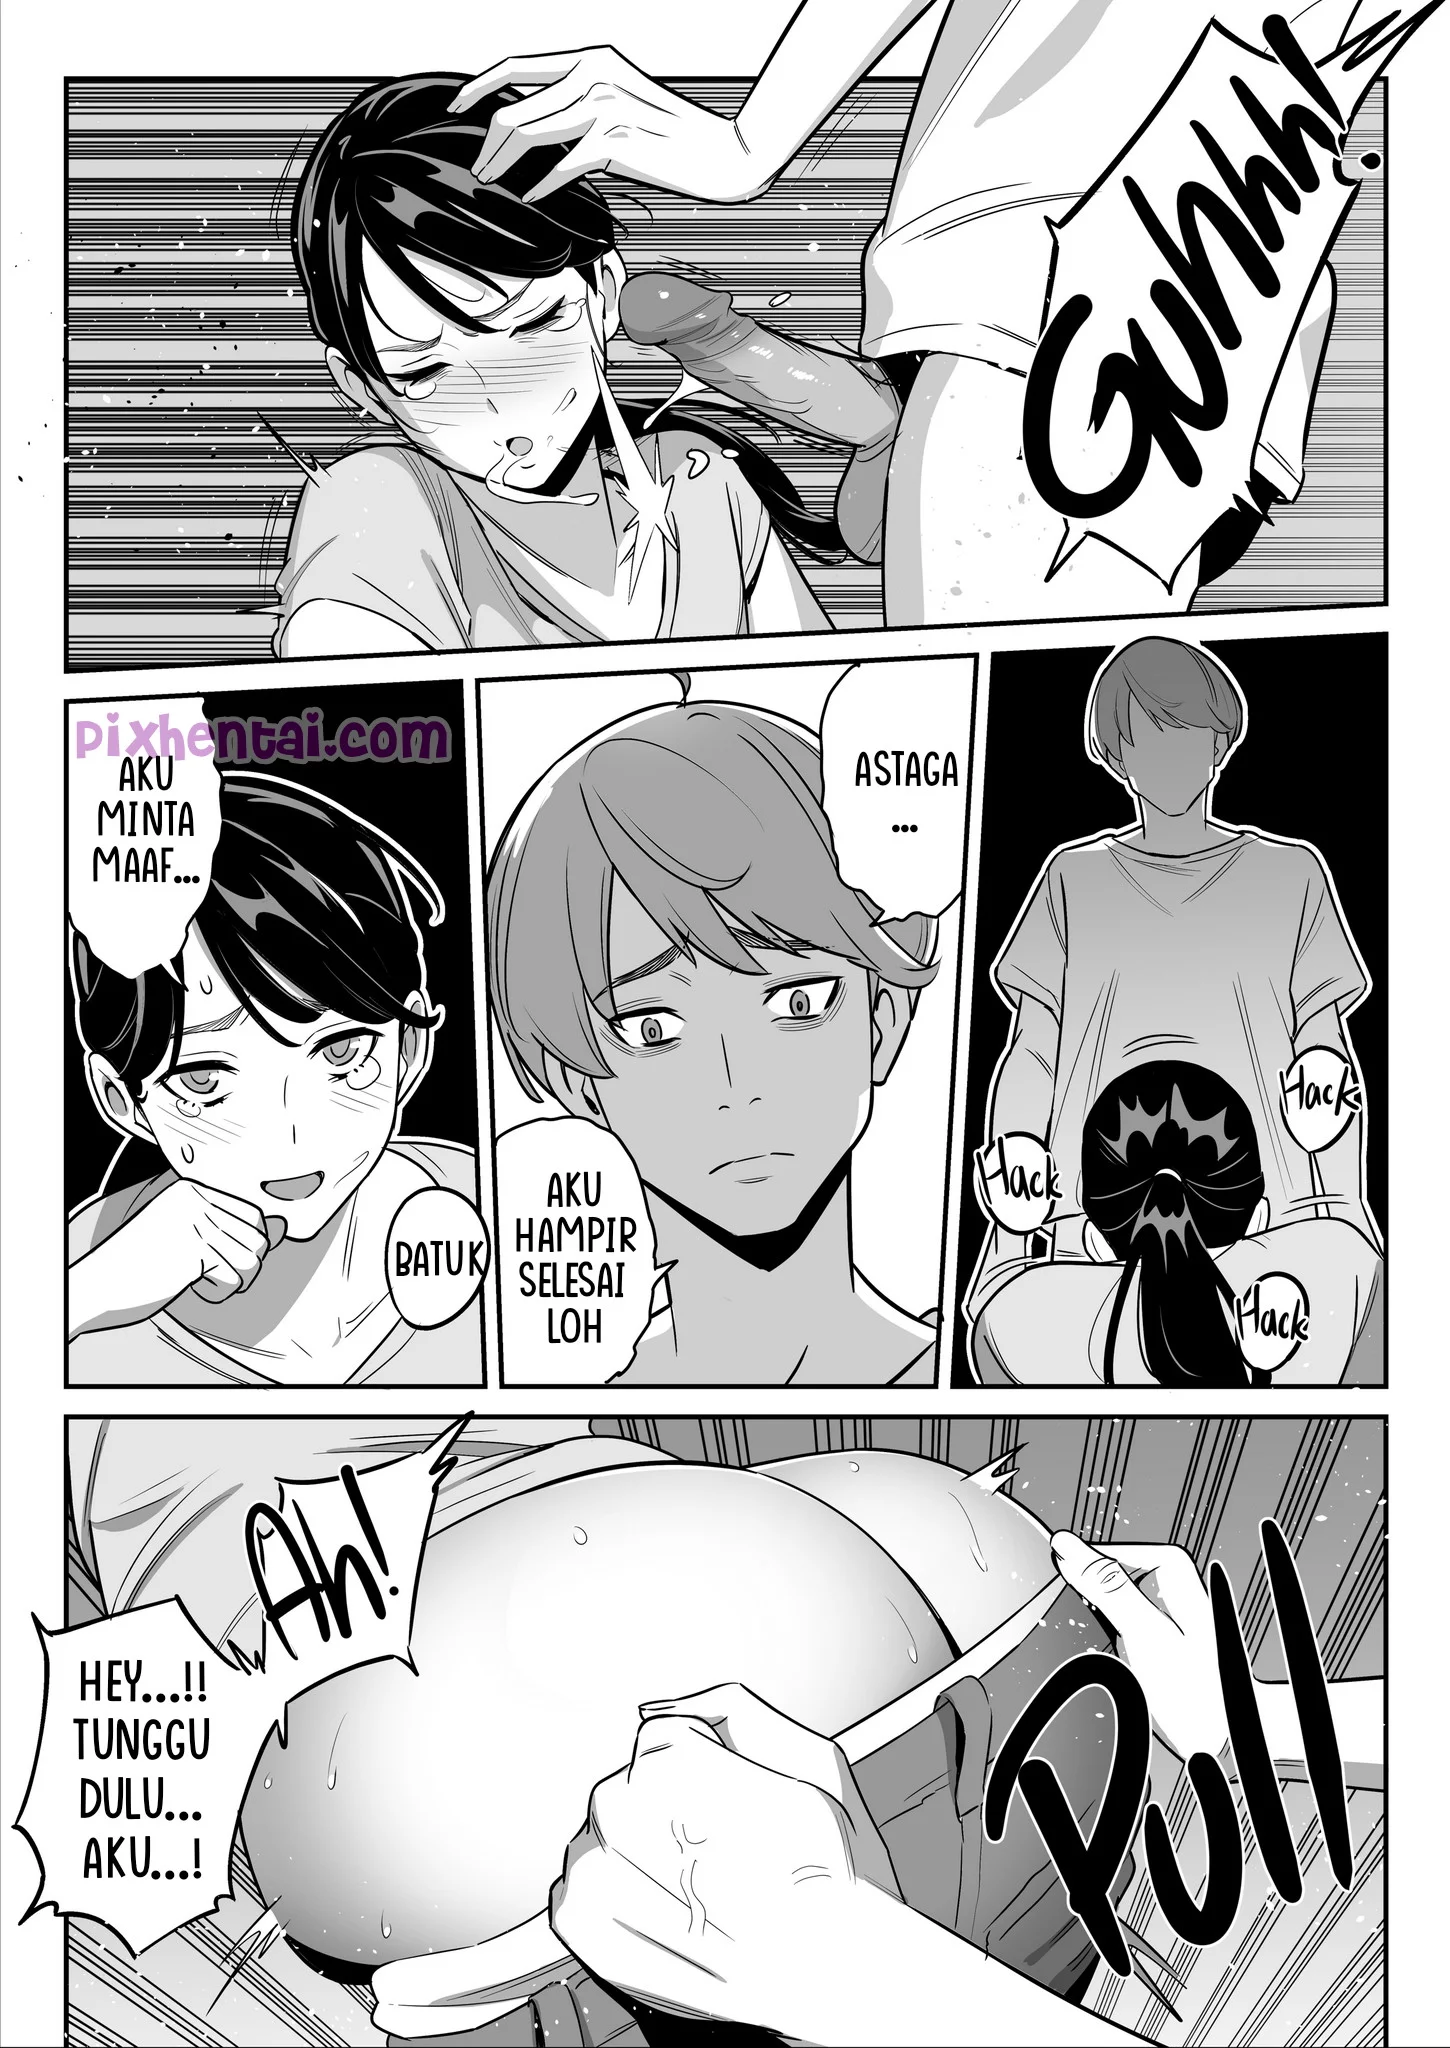 Komik hentai xxx manga sex bokep Oh Yeah I Scored Big at a Discount Outcall Agency Continued 11